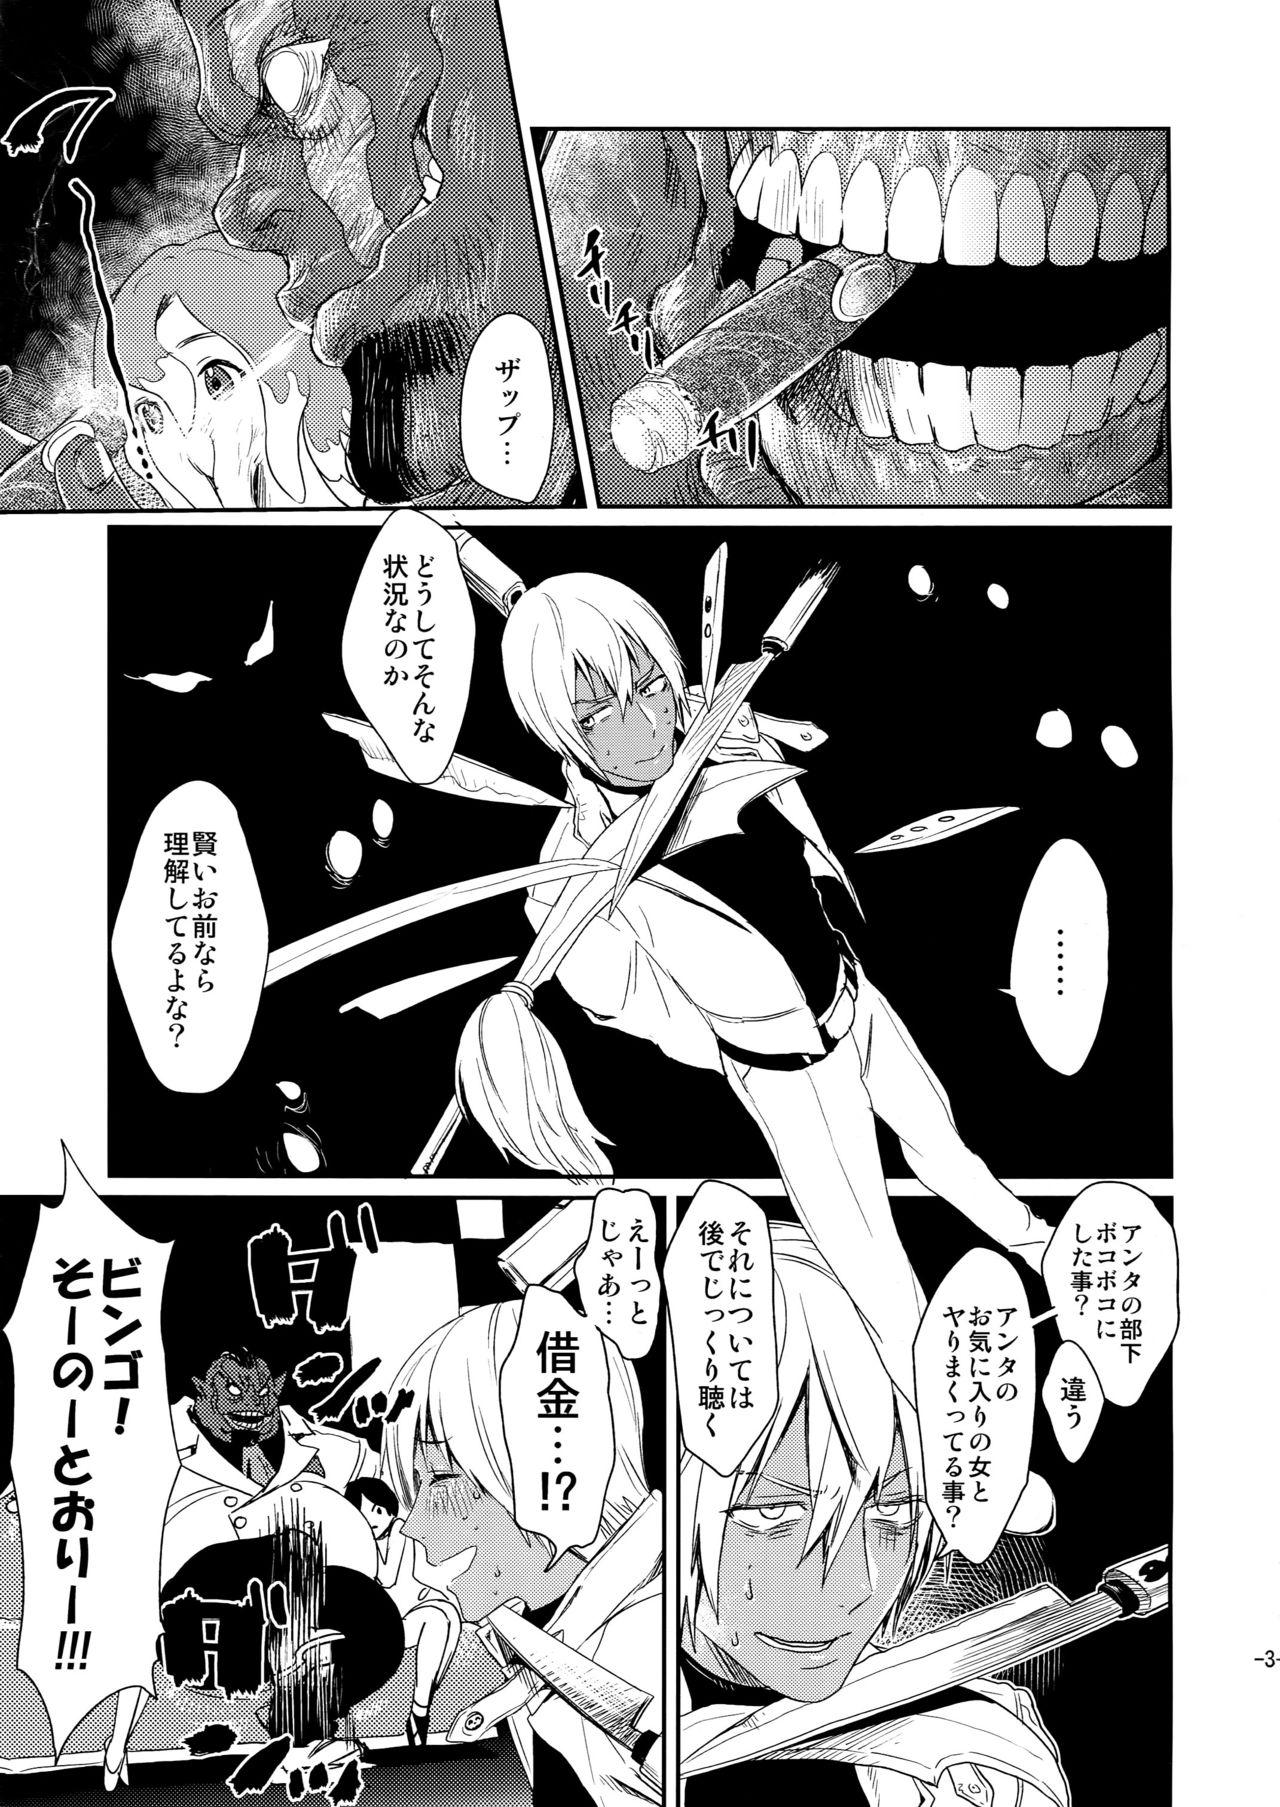 Ethnic CHEAP FICTION - Kekkai sensen Old And Young - Page 5